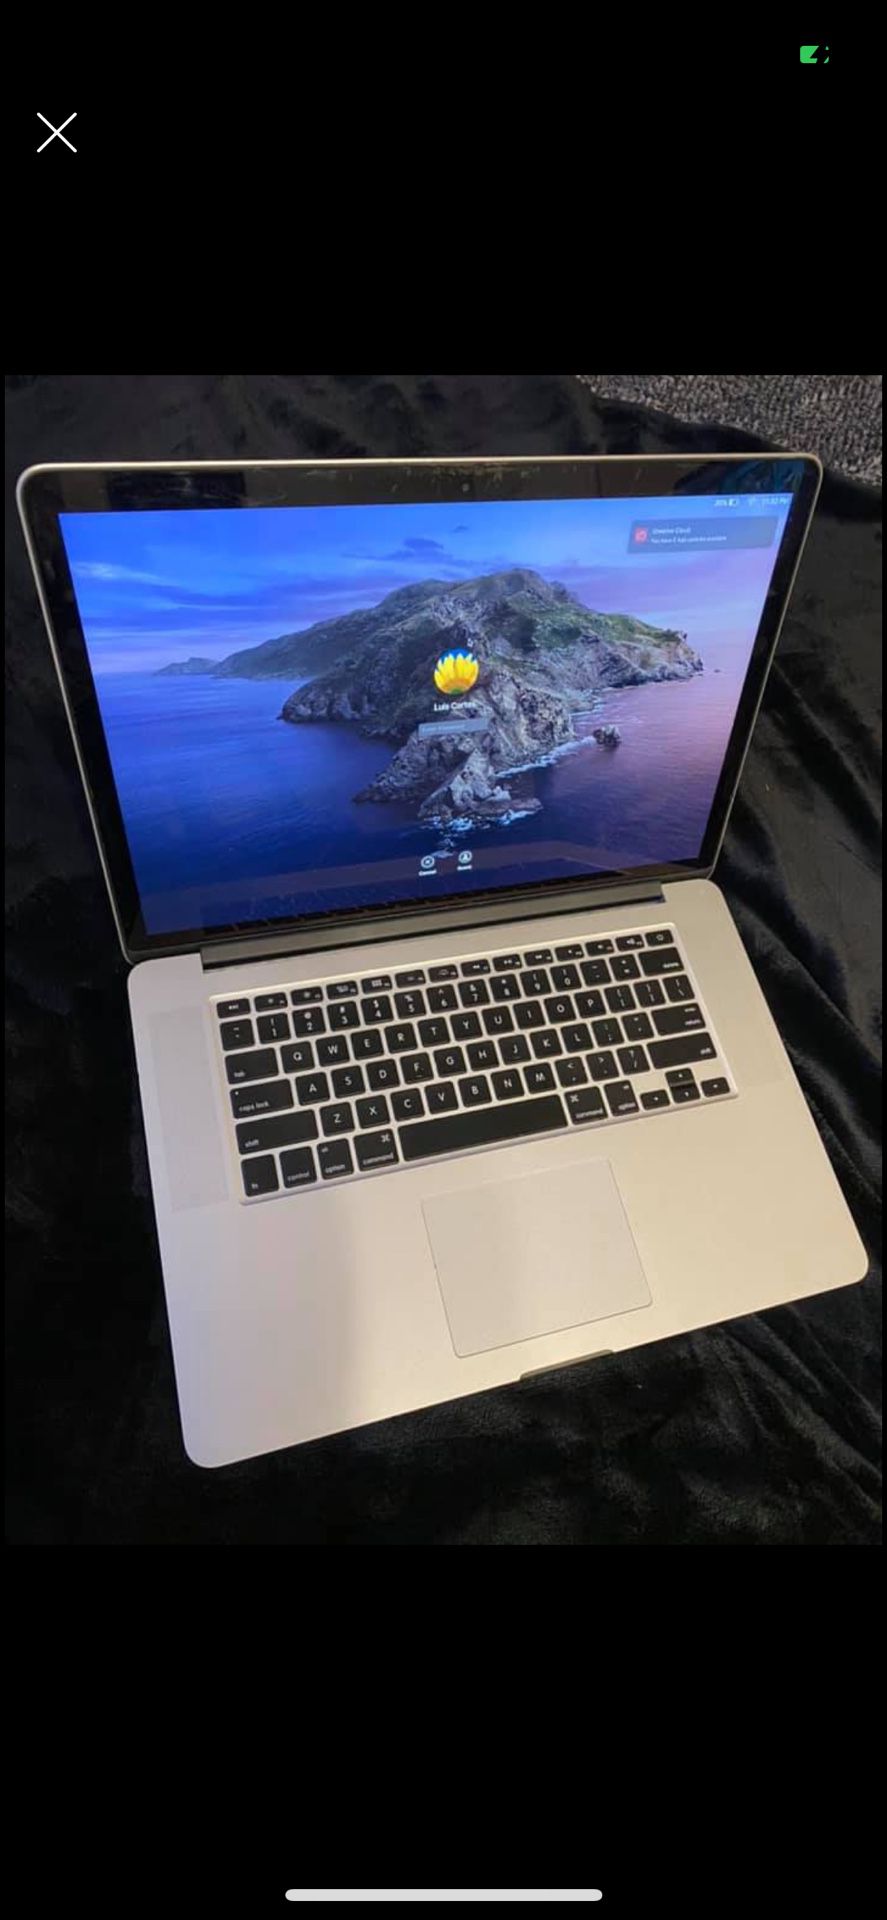 16gigs, 500 SSD hard, like new Retina thin 4K MacBook Pro i7 15” excellent condition with original charger purchased 2014